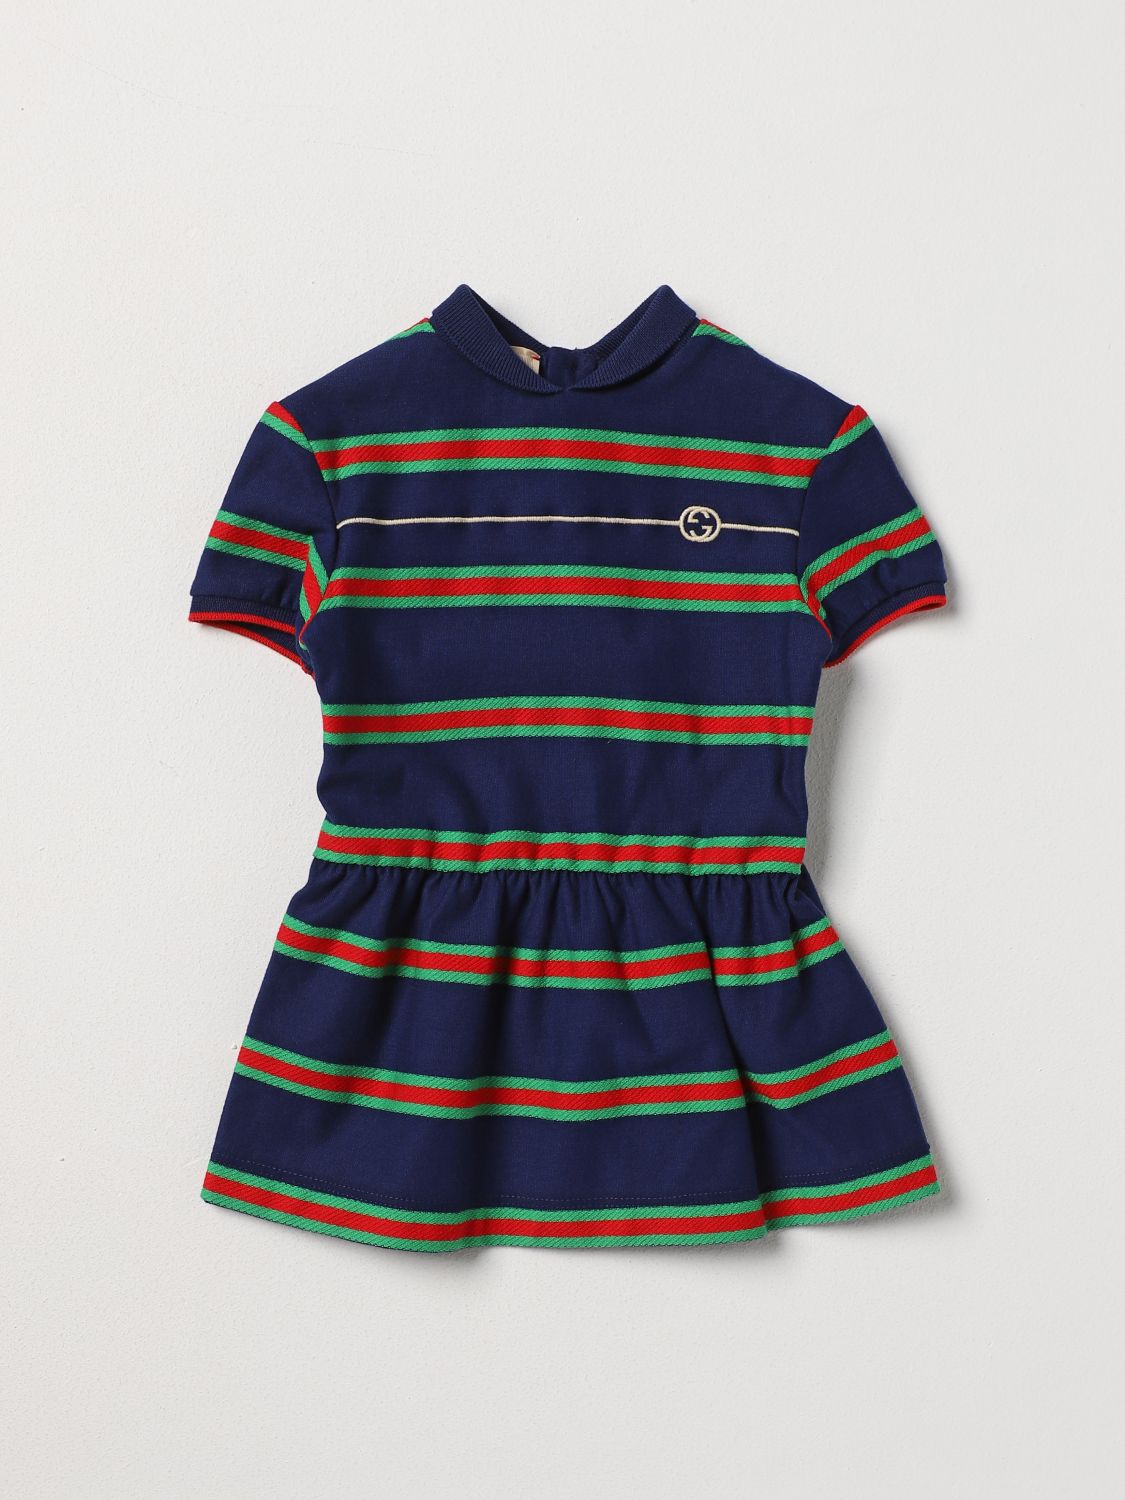 Shop GUCCI Organic Cotton Baby Girl Dresses & Rompers by BlueJasmineshop